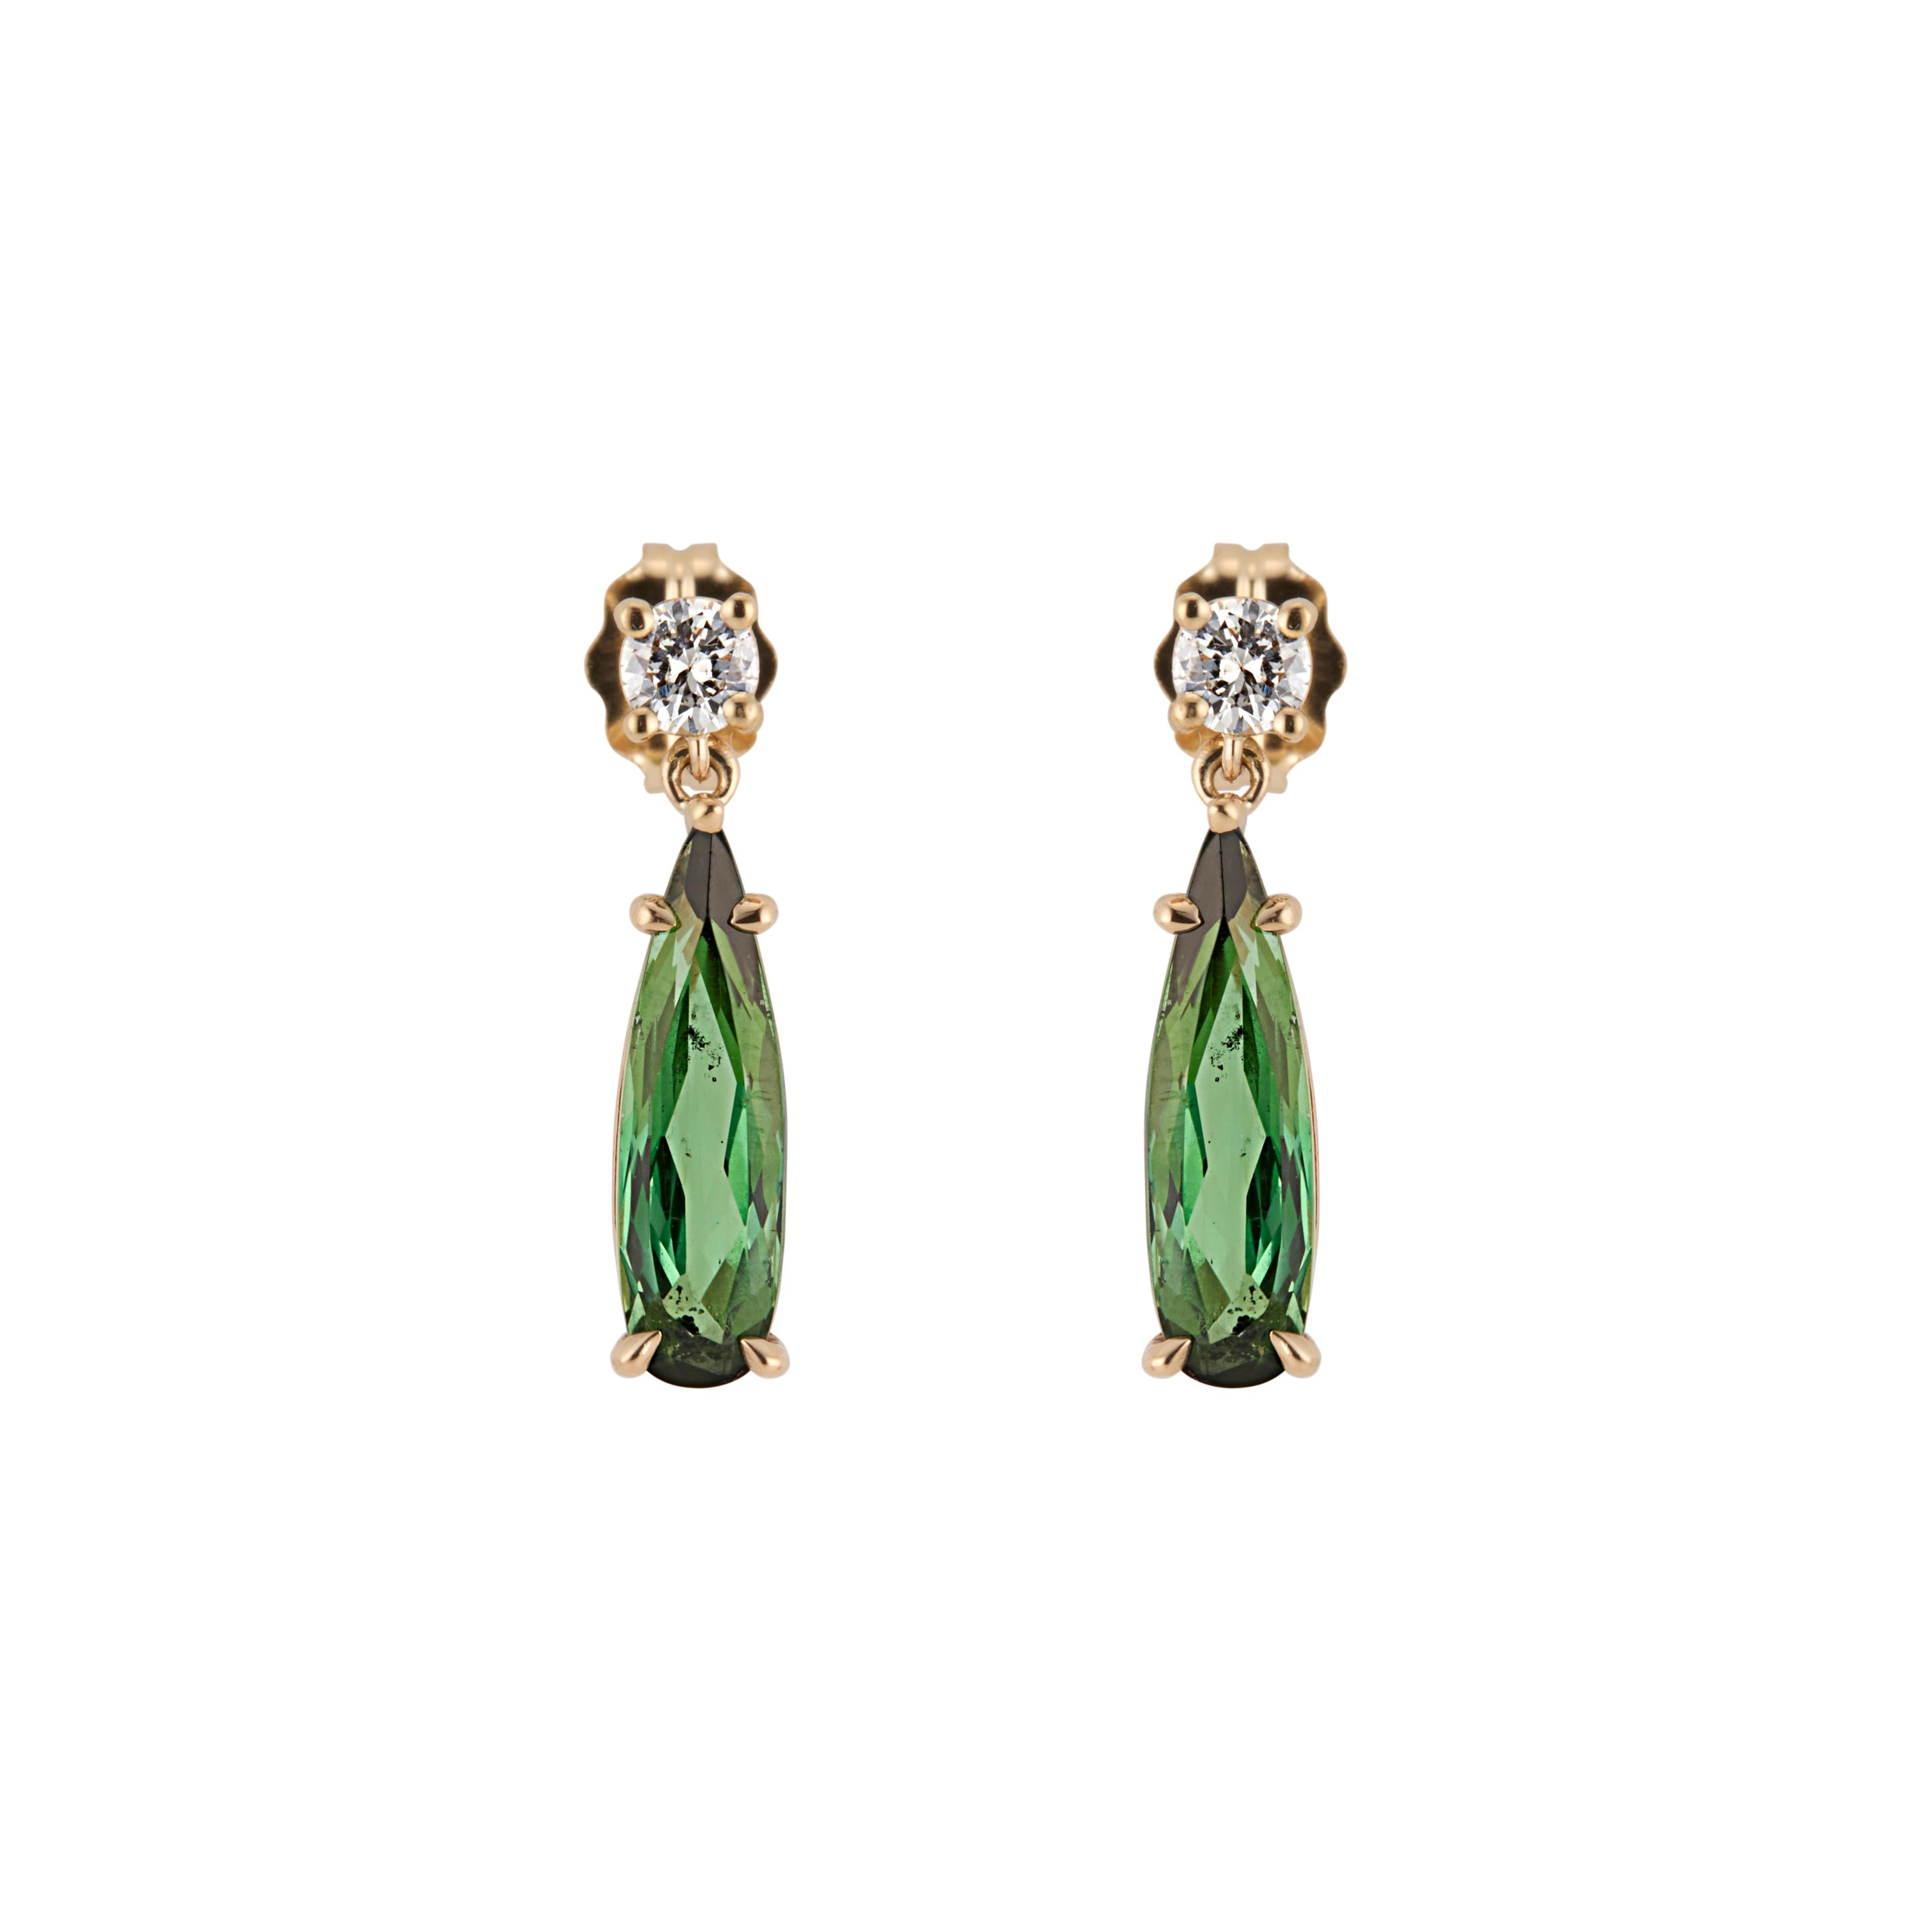 Bright green natural tourmaline diamond dangle earrings. 2 pear shaped green tourmalines, accented with 2 round brilliant cut diamonds in 14k yellow gold settings. Designed and crafted in the Peter Suchy workshop

2 pear shape green tourmaline, SI